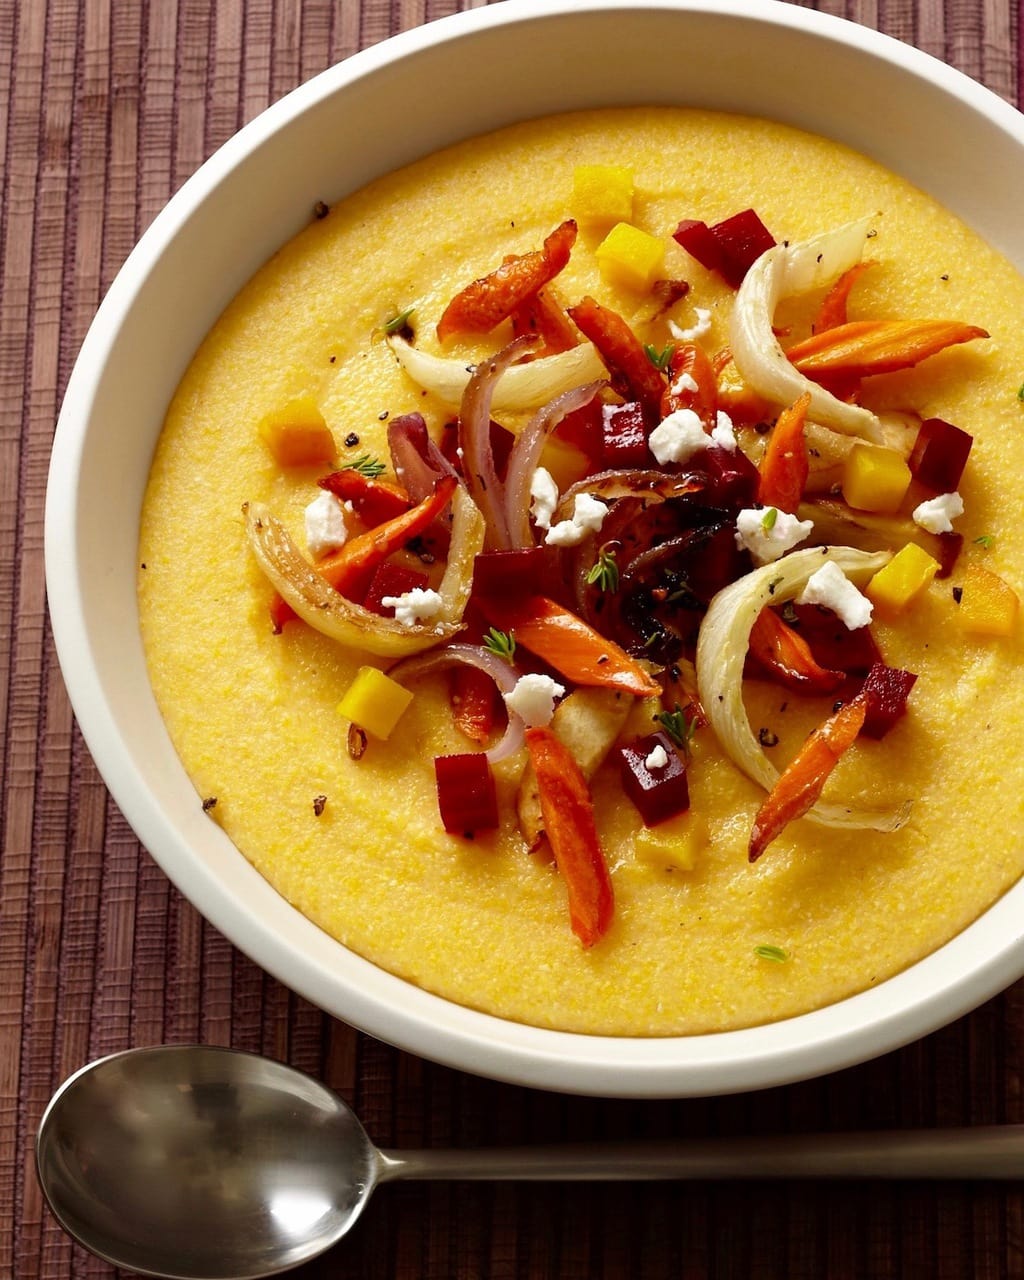 Creamy polenta recipe in a bowl topped with roasted vegetables